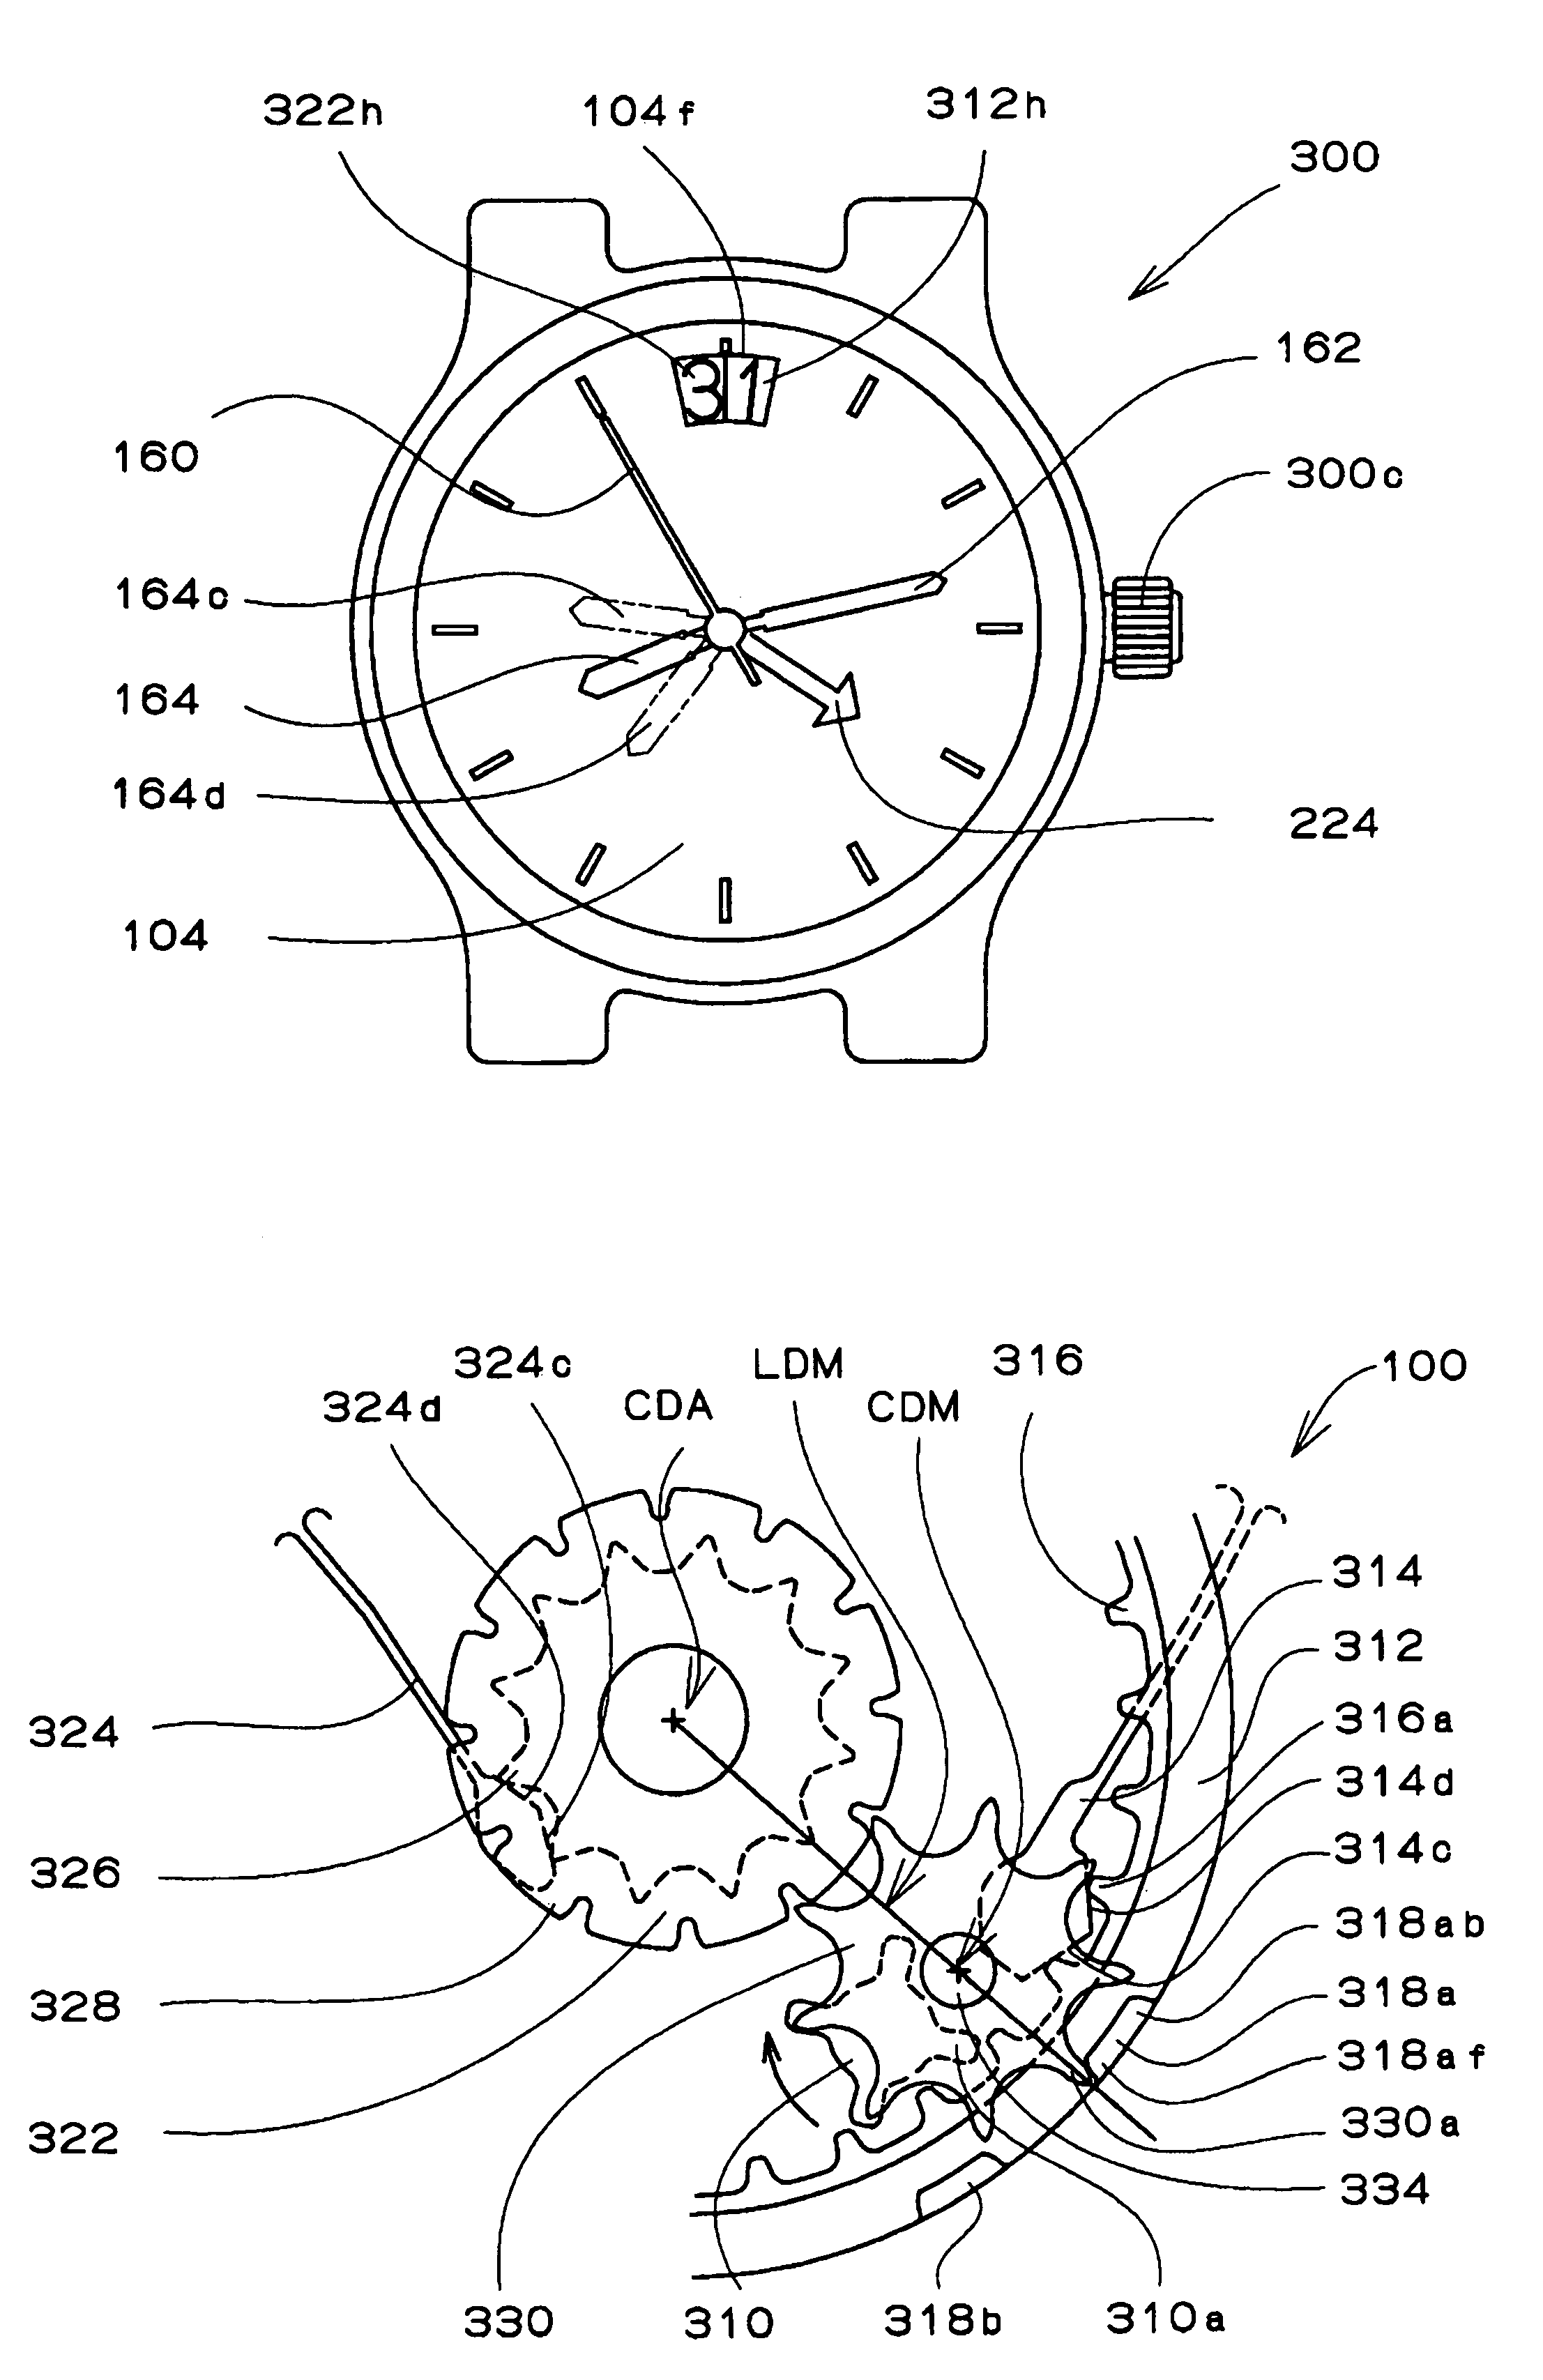 Timepiece with calendar mechanism containing 2 date indicators